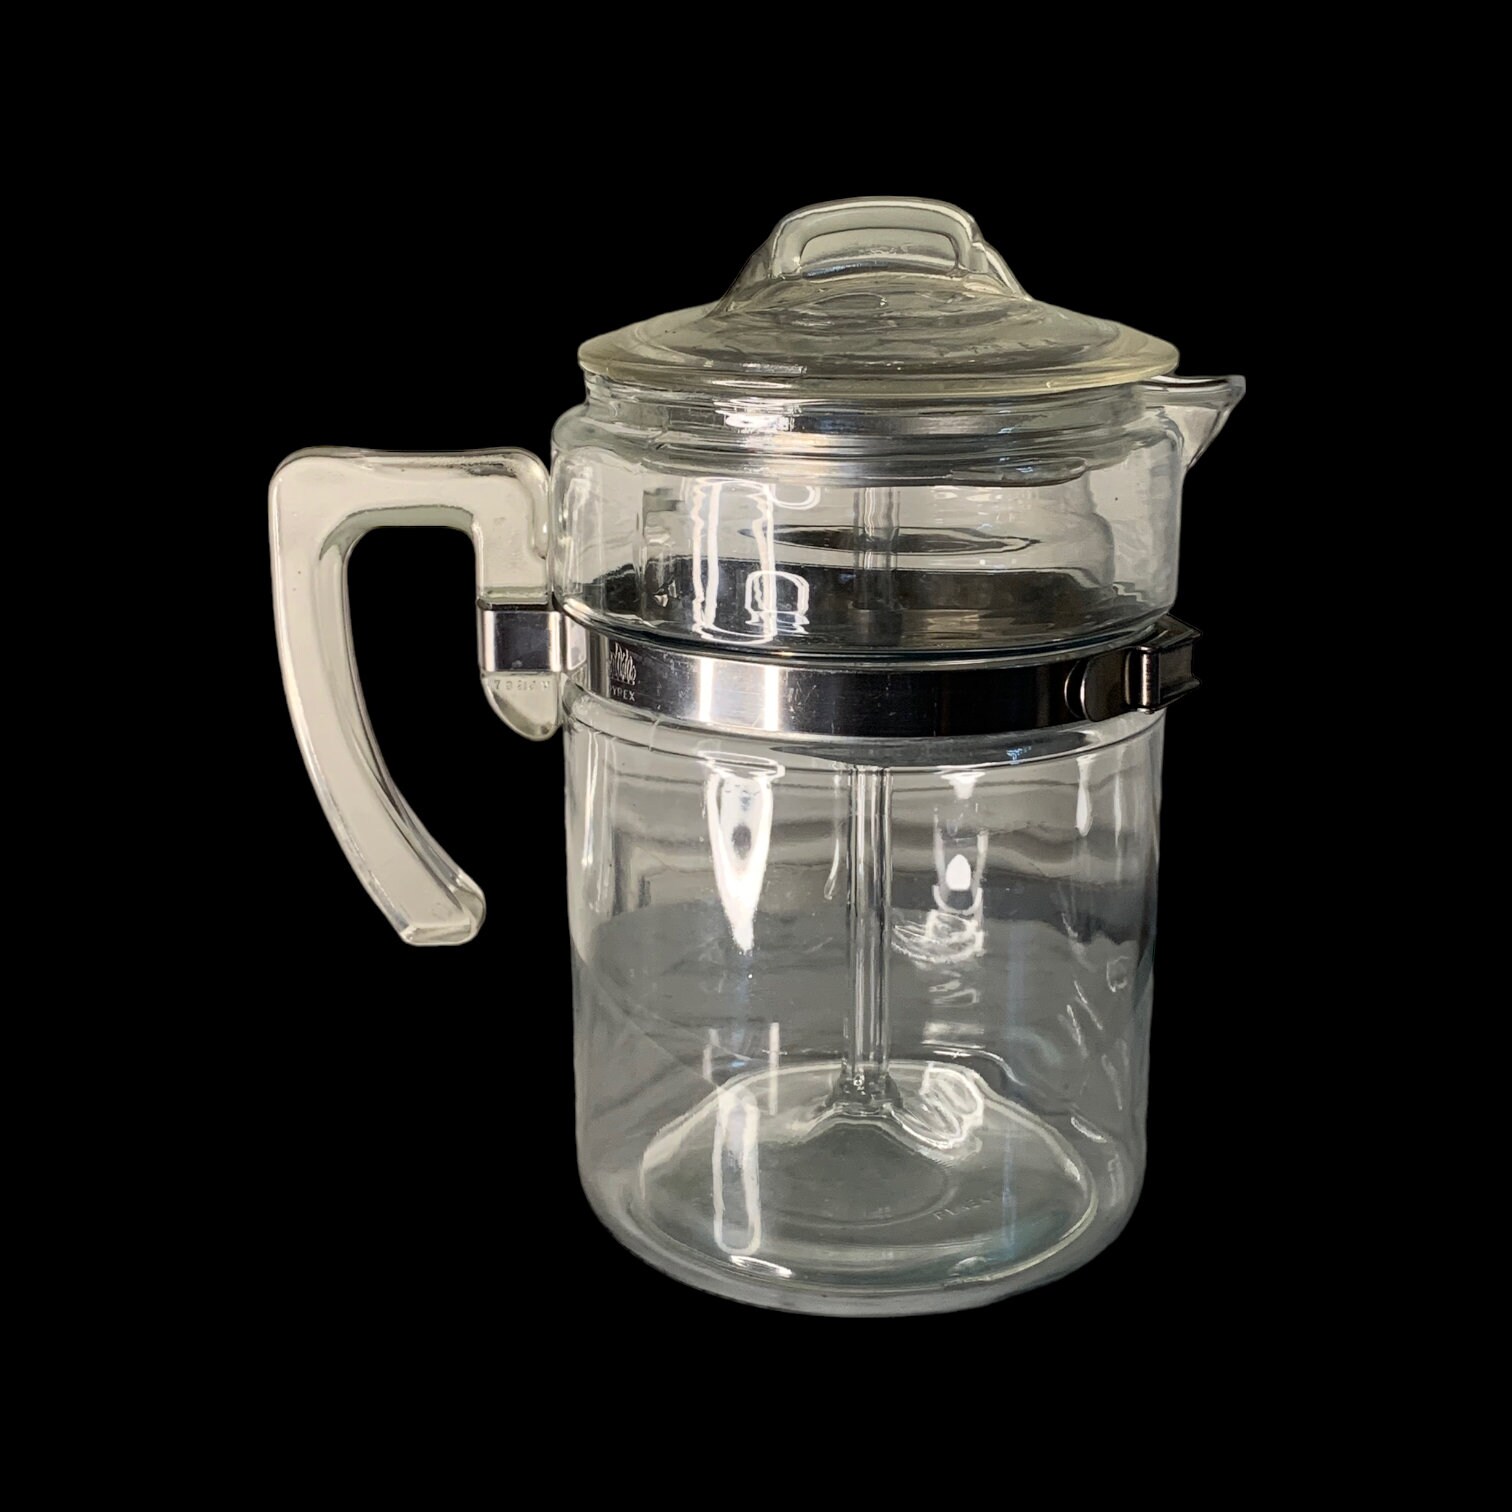 Vintage Pyrex Flameware Coffee Percolator Bakelite Handle Clear Glass  Stainless Steel 9 Cup Capacity Stovetop Made in USA 7829 